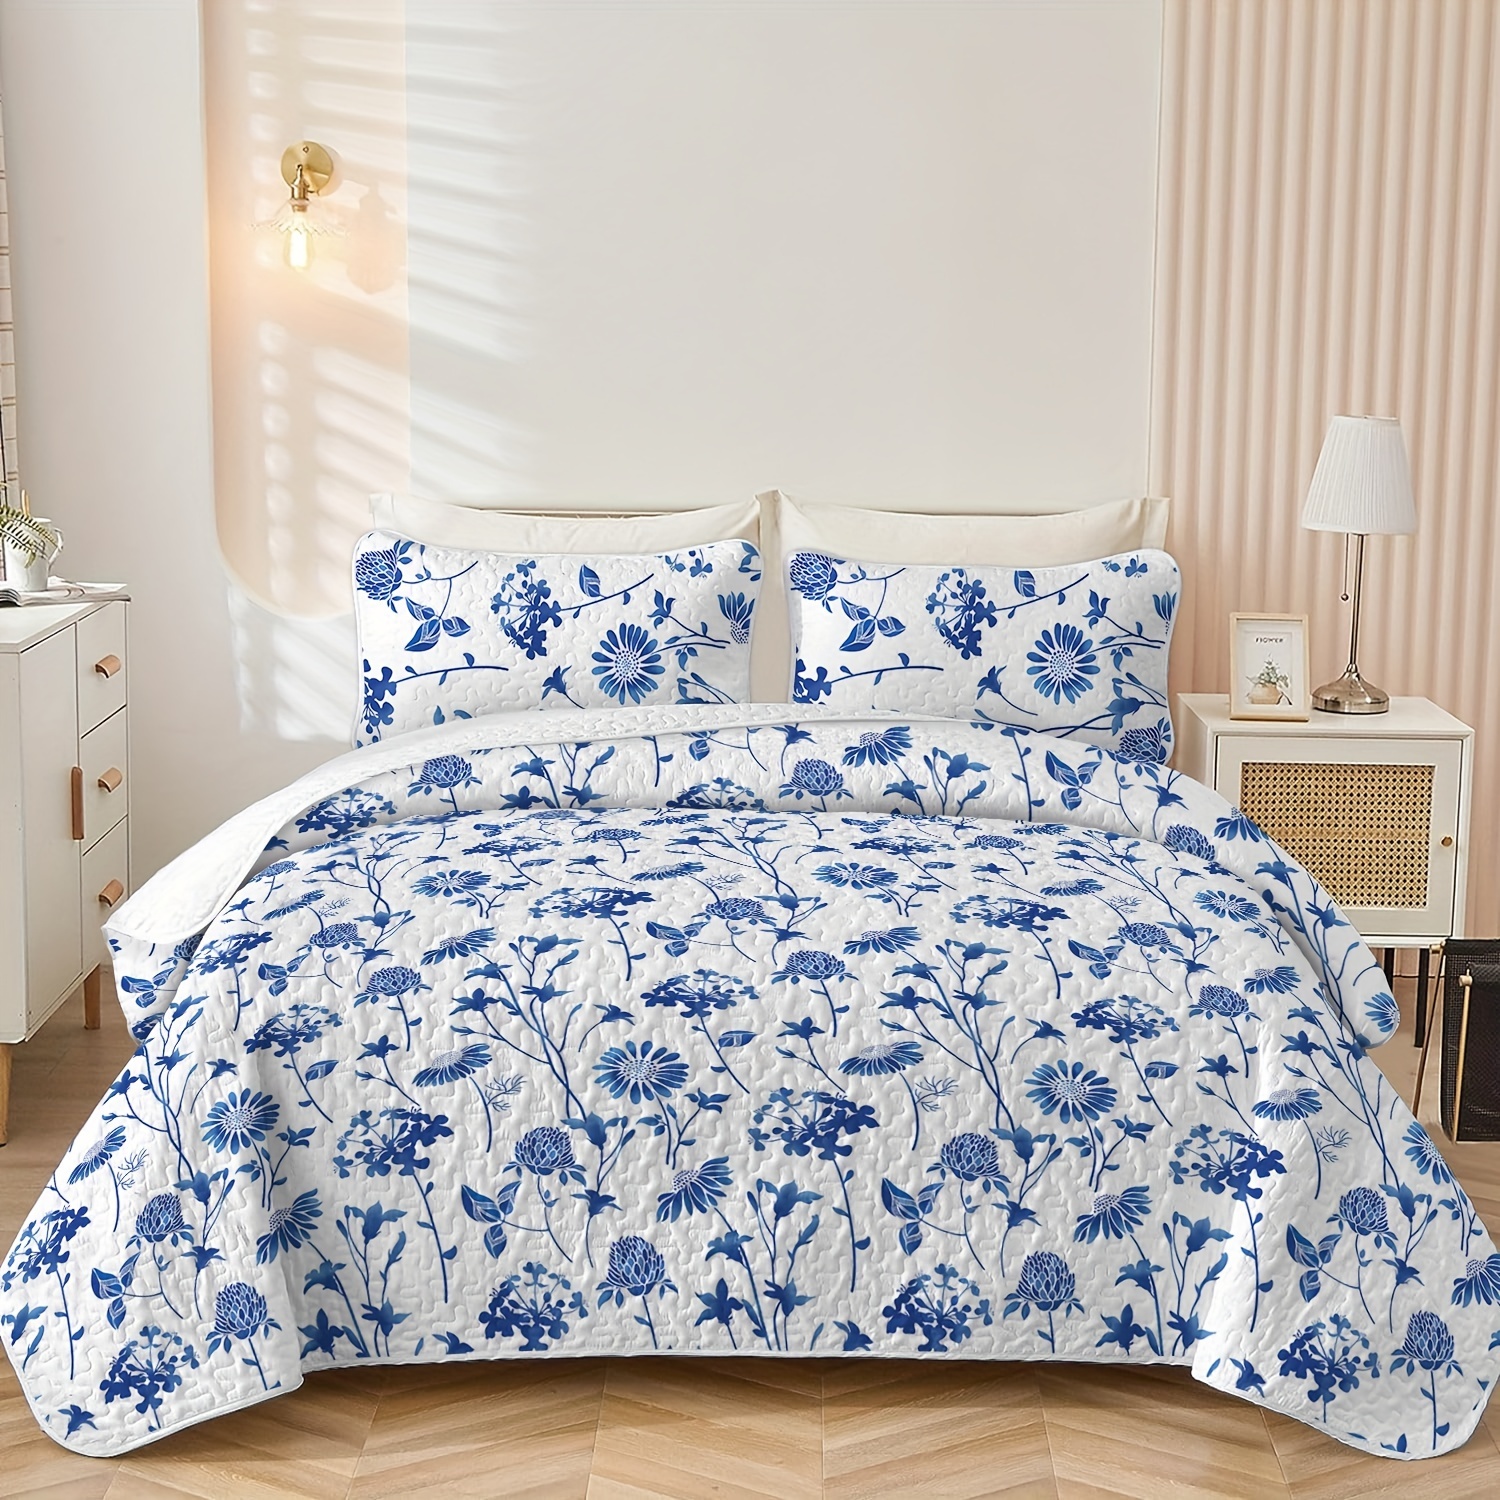 

3-piece Floral Quilt Set - Soft Lightweight Polyester Bedspread And Coverlet With 2 Pillowcases, Machine Washable, Woven Craftsmanship, Digital Print Design, Queen King Size, All Season Comfort